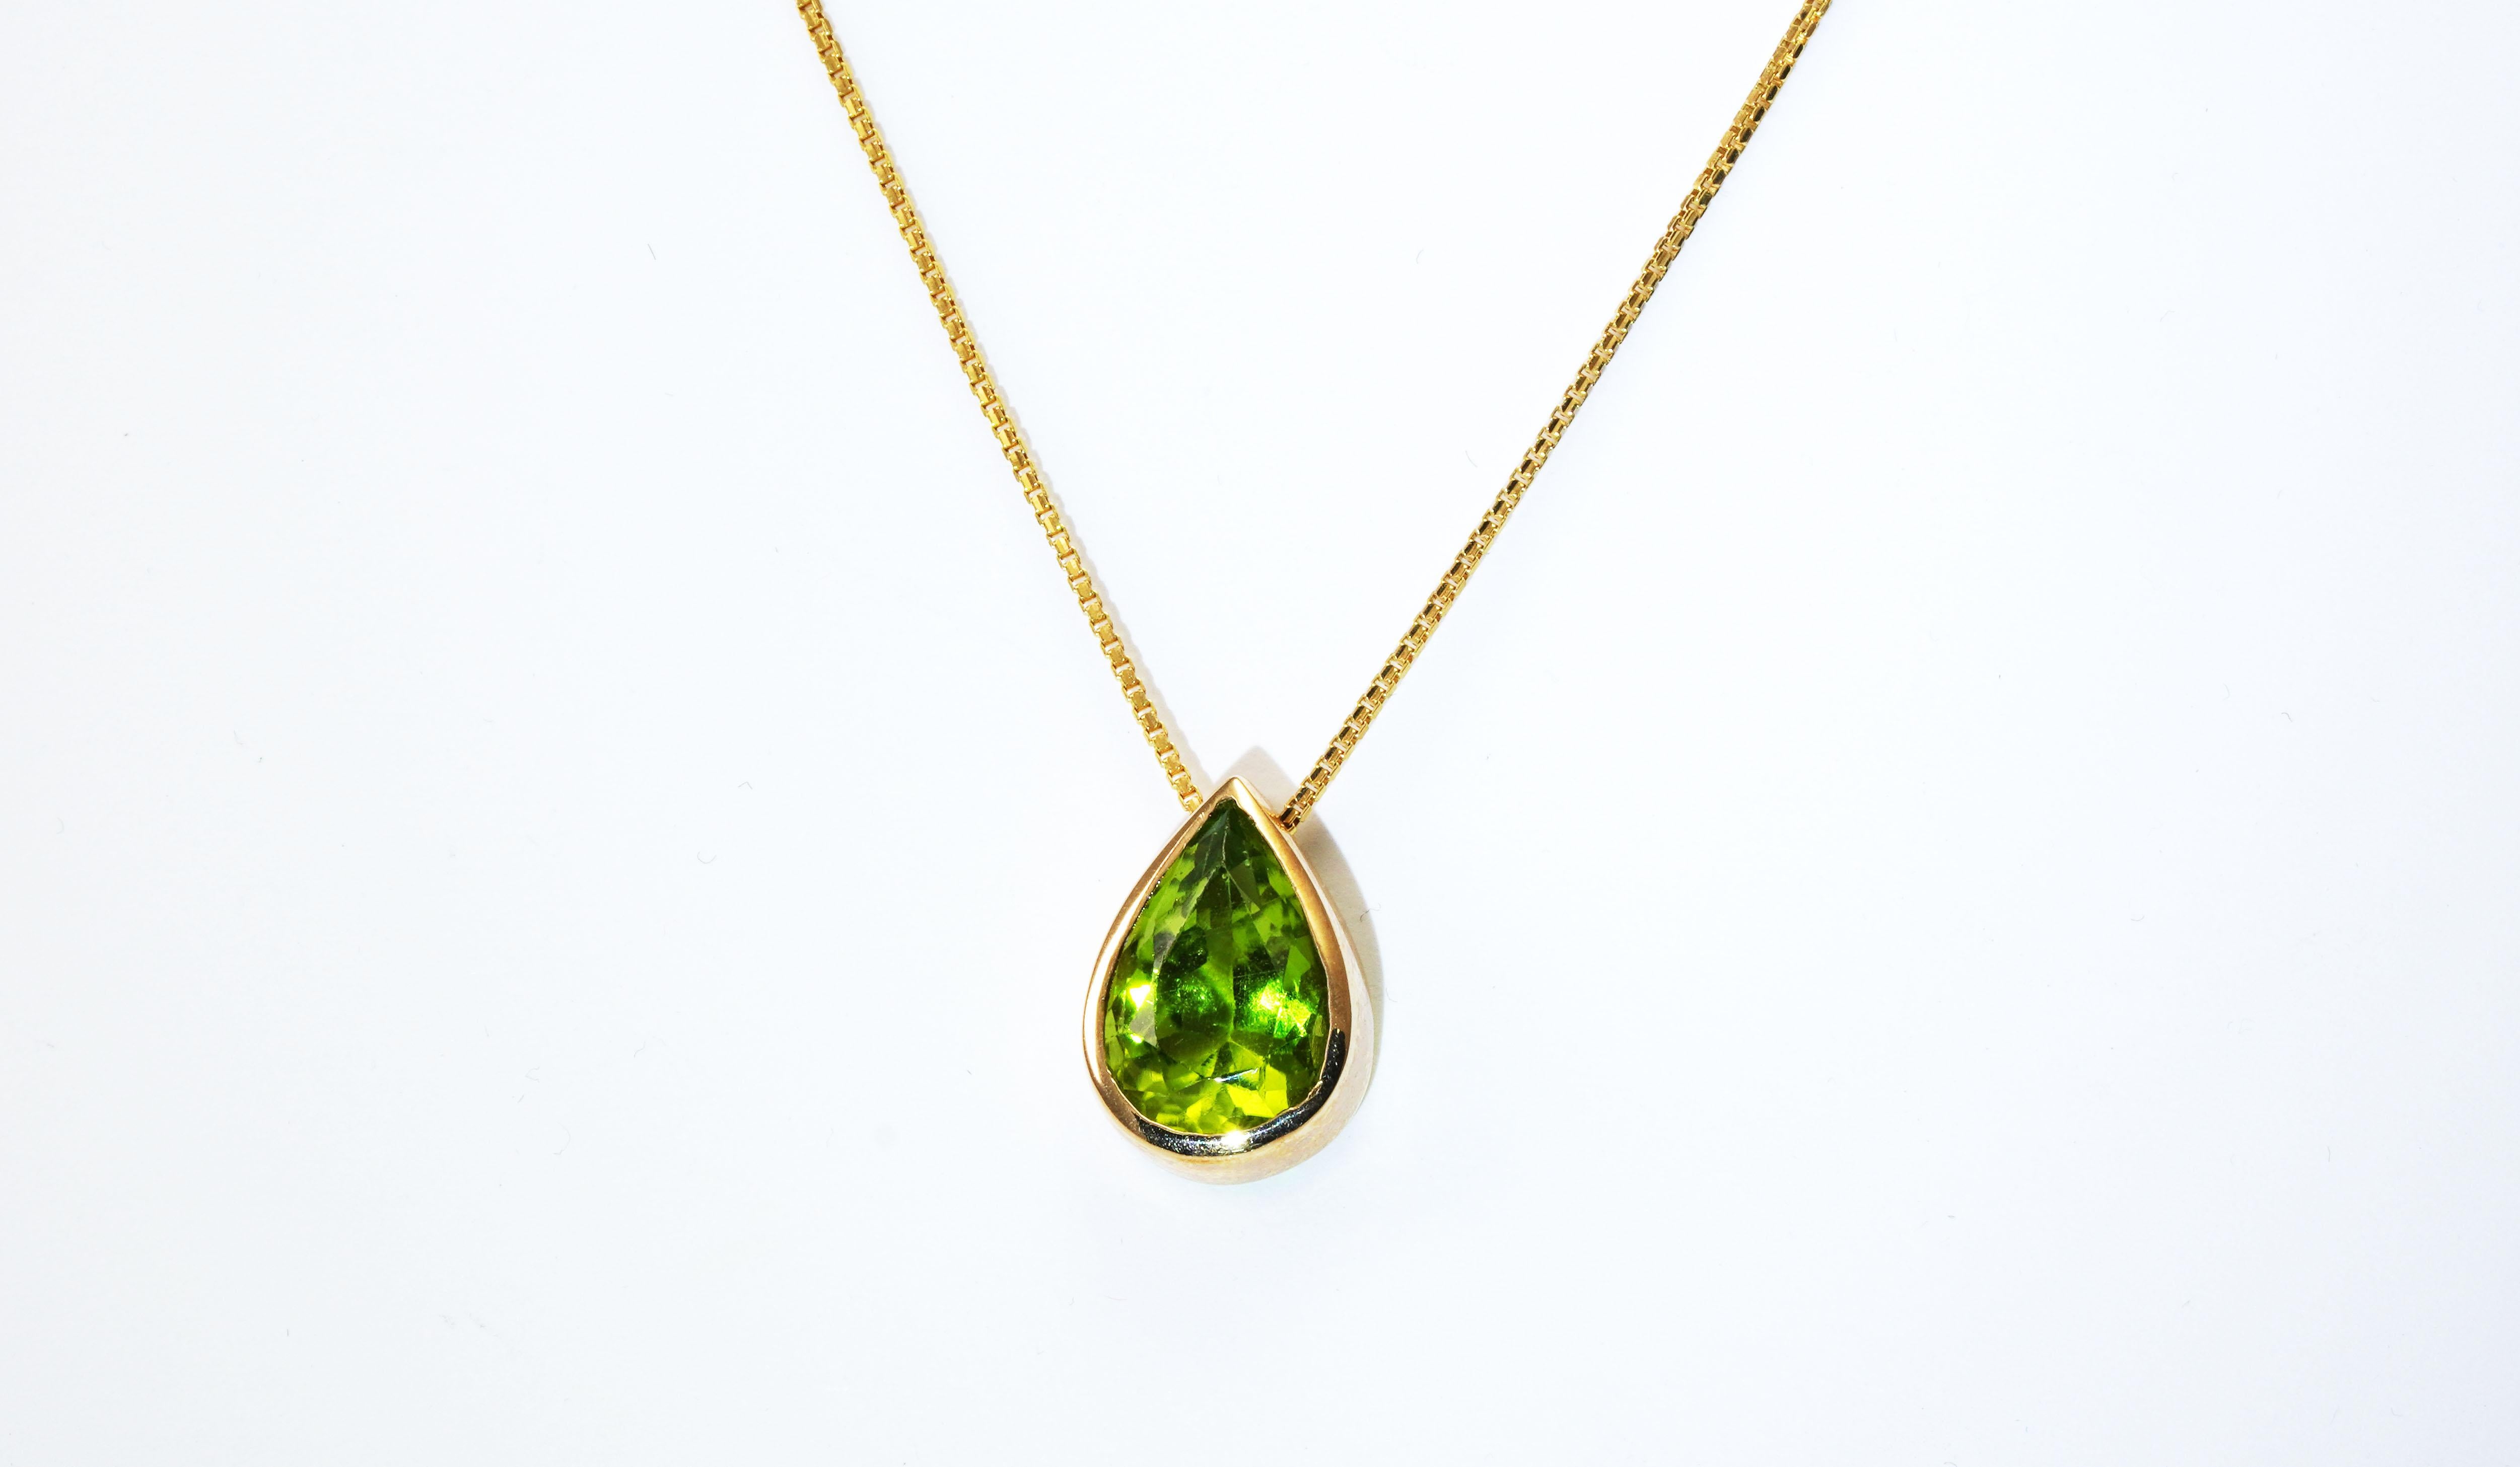 14 kt Gold Necklace with Peridot
Gold color: Yellow
Dimensions: 42 cm Width
Total weight: 3.22 grams

Set with:
- Peridot
Cut: Pear
total weight: 3.19 ct
Colour: Green